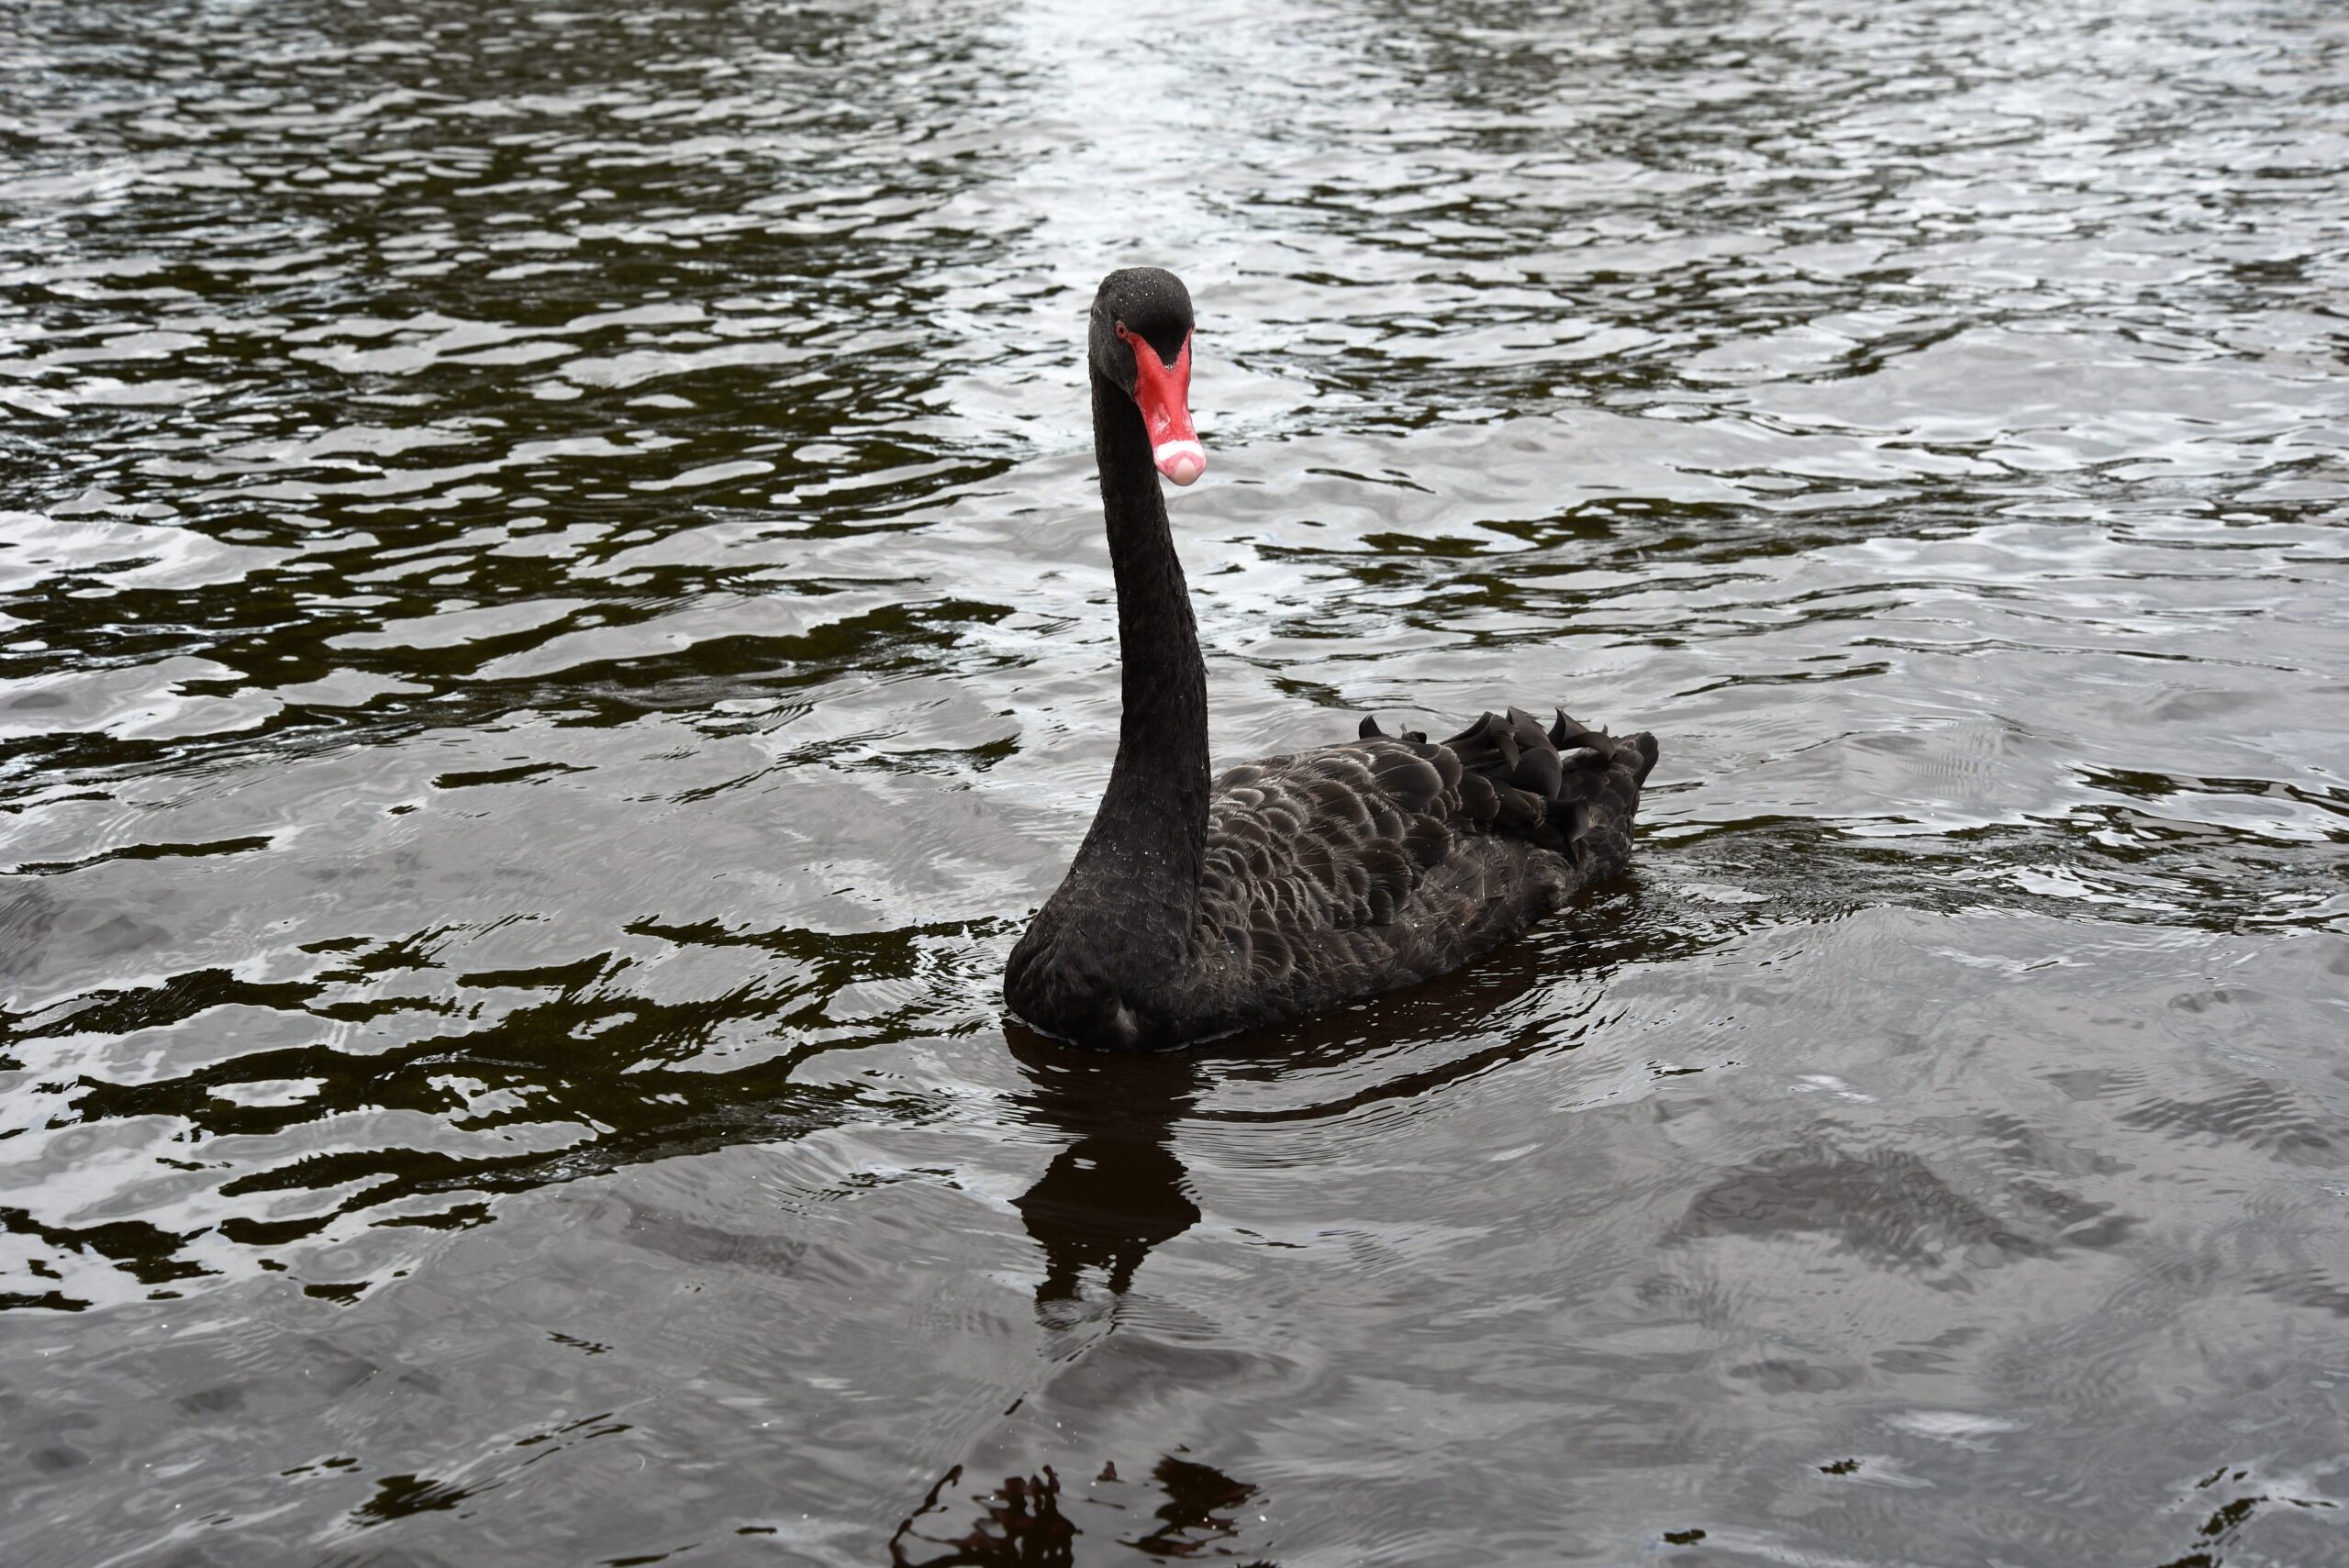 A photo of a black swan floating on some water. It is mostly black with a large, oval-shaped body, a long, thin neck, a small head and a bright red beak.